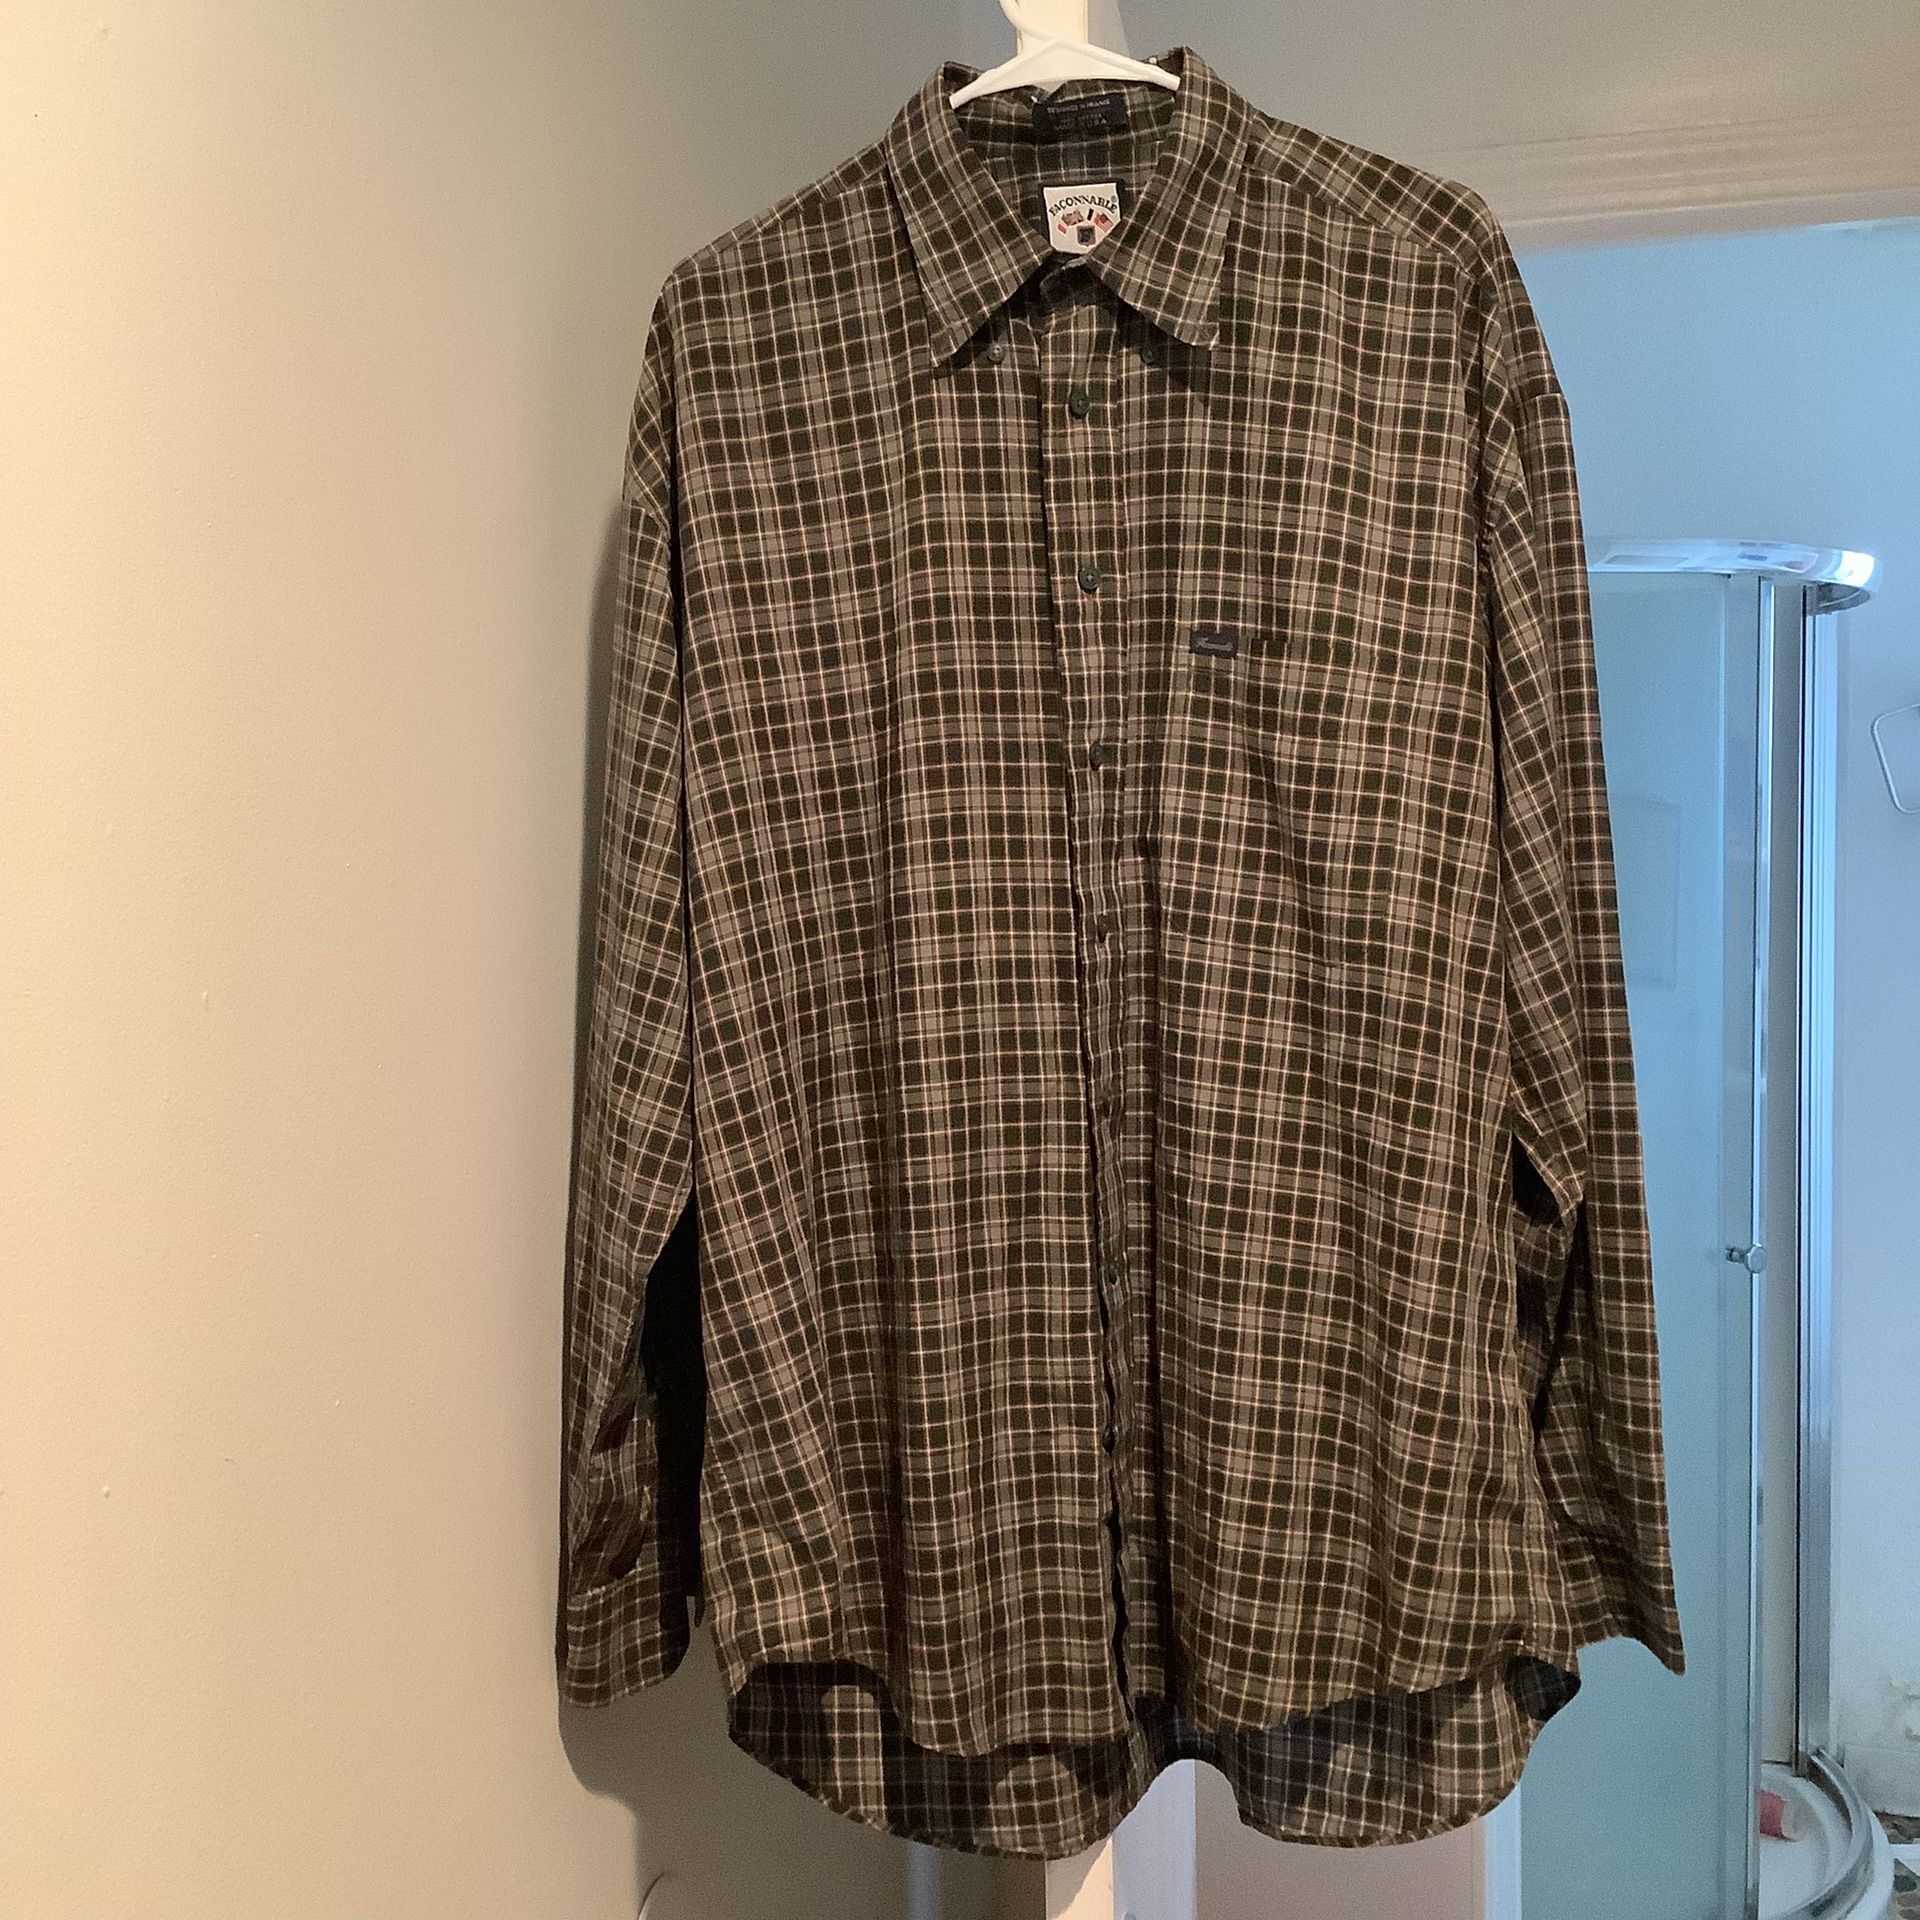 Faconnable Men's Dress Shirt. Size XL. Used in great condition. Plaid flannel made in USA America designed in France by Albert Goldberg 100% cotton